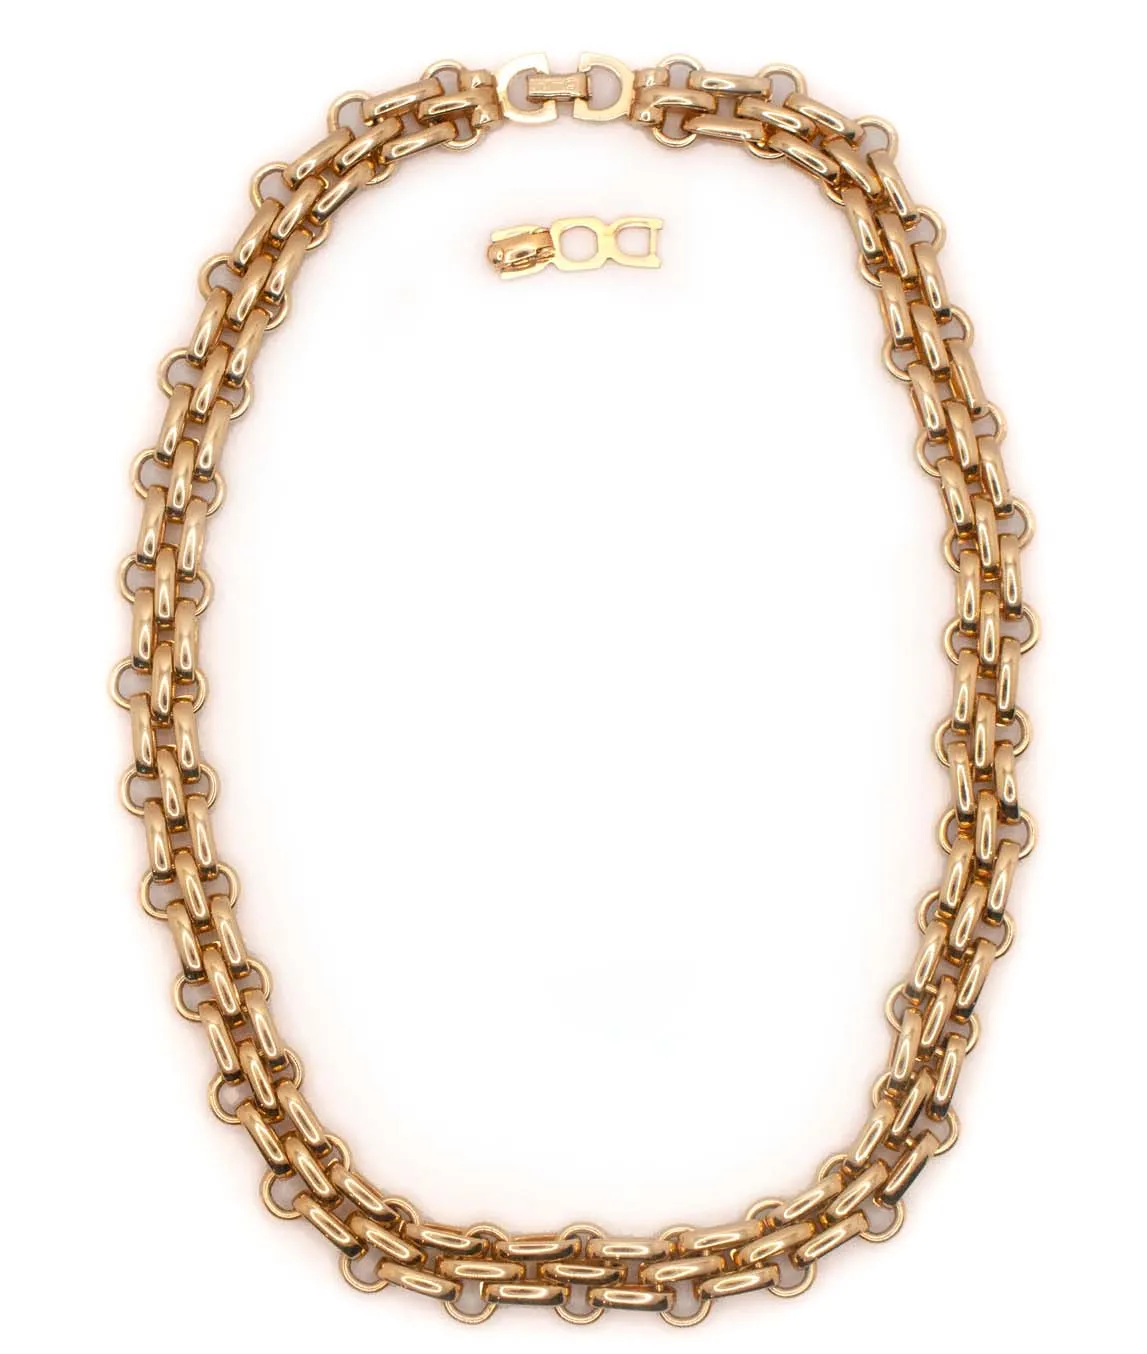 Christian Dior chunky fancy link gold plated chain necklace with extender